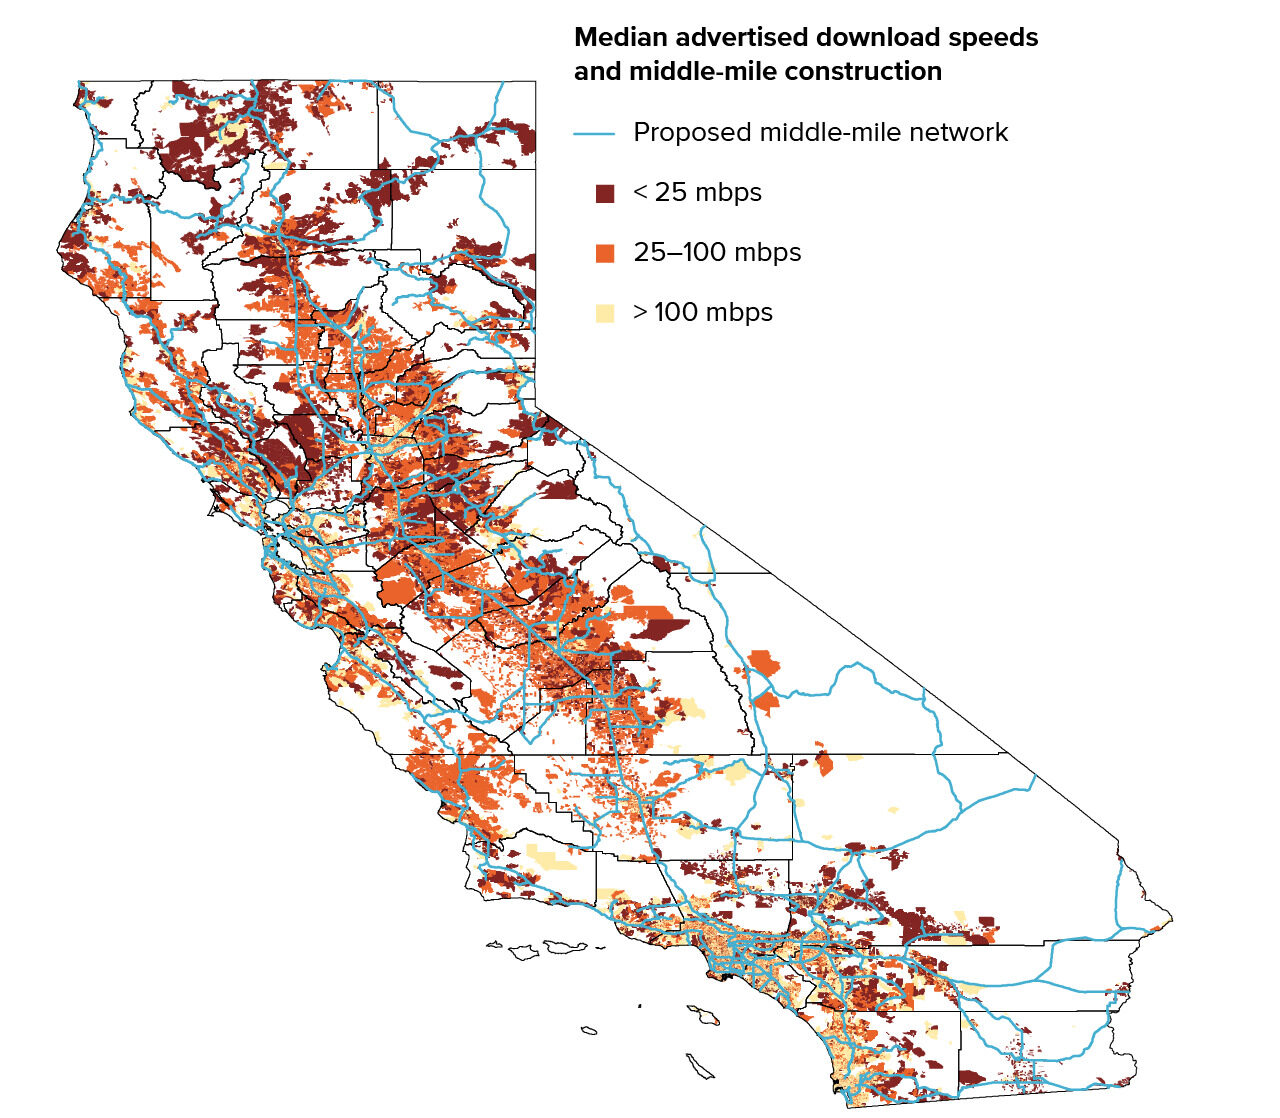 figure 4 - California’s proposed middle-mile network prioritizes unserved and underserved areas